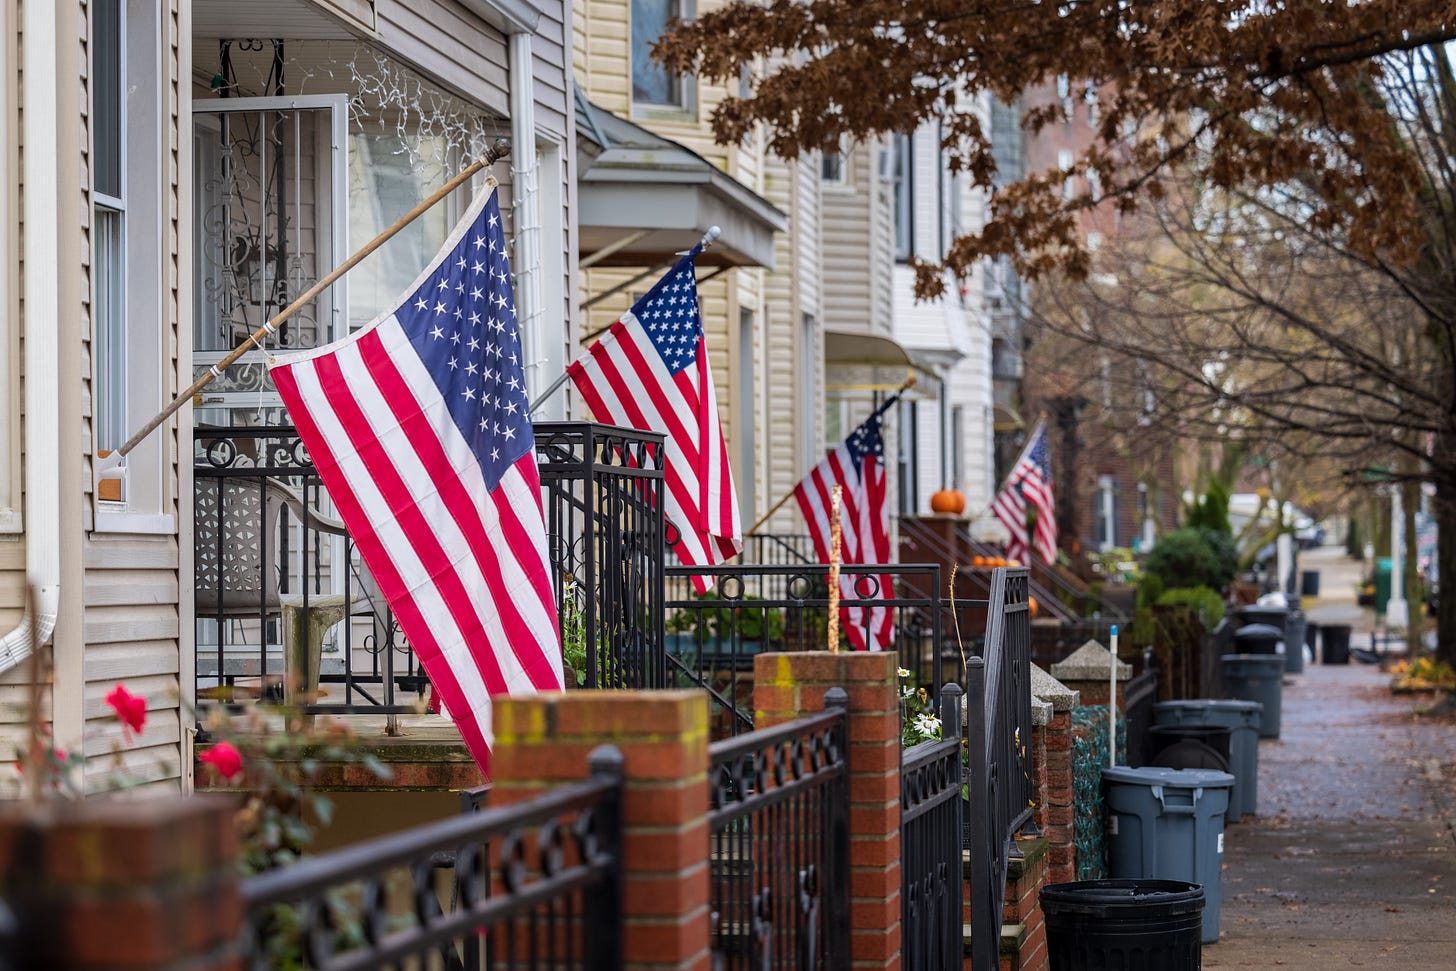 The bill would restrict HOAs' power over flag decor residents chose to put up